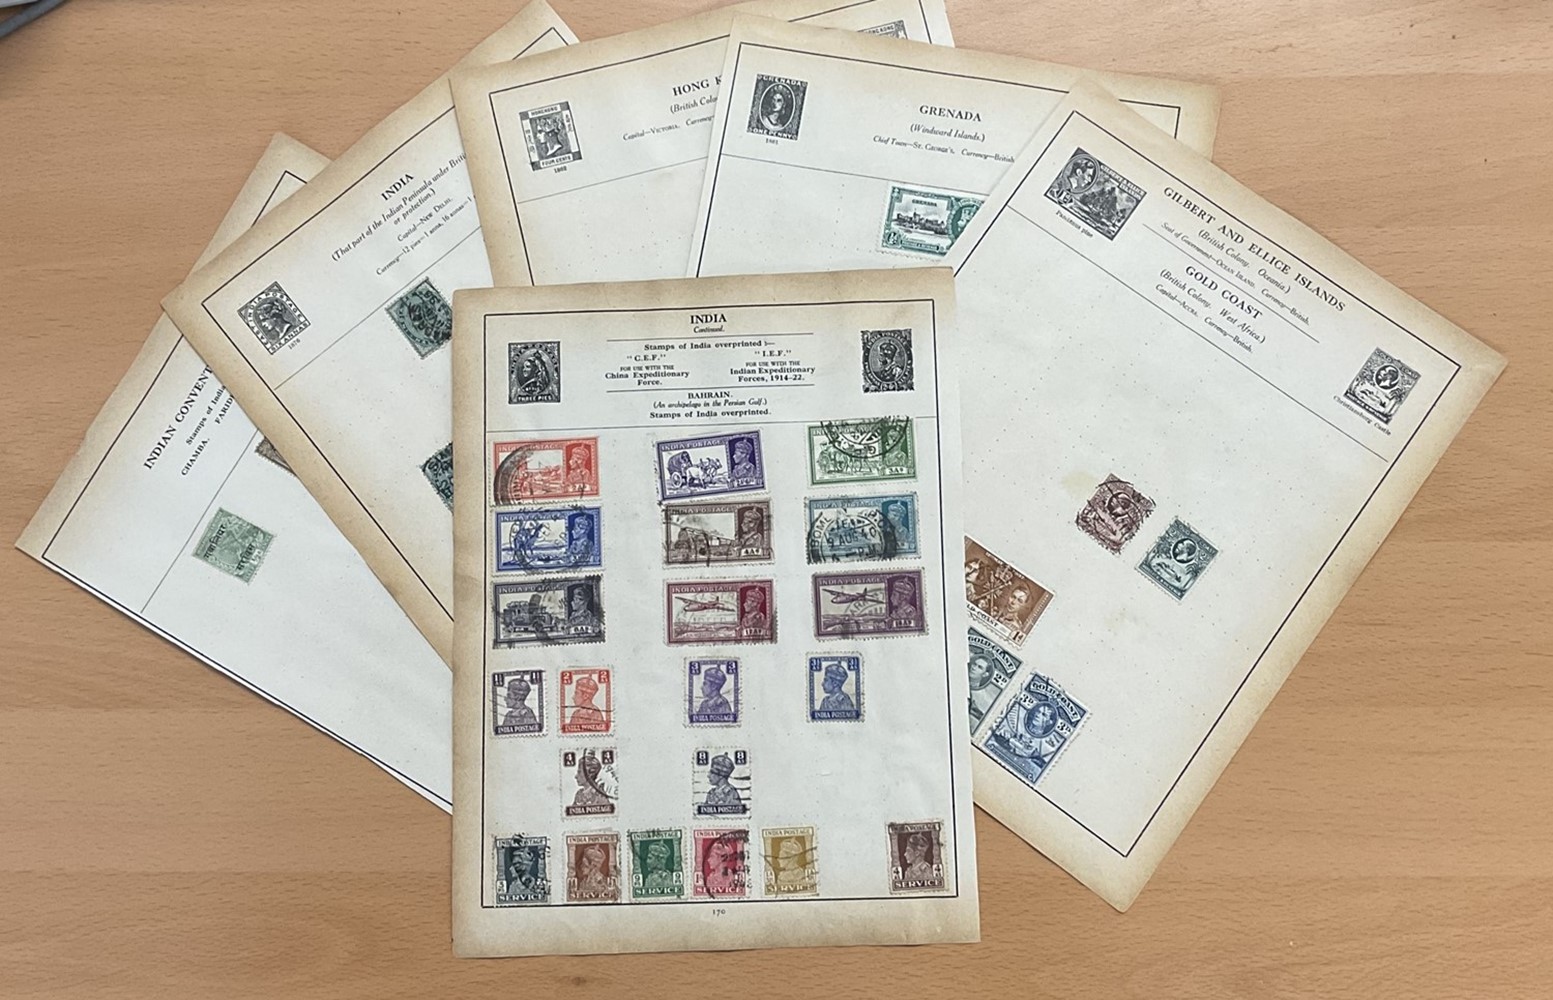 19 Stamp Pages British commonwealth. Includes India and states, Iceland, Honduras, Guatemala,